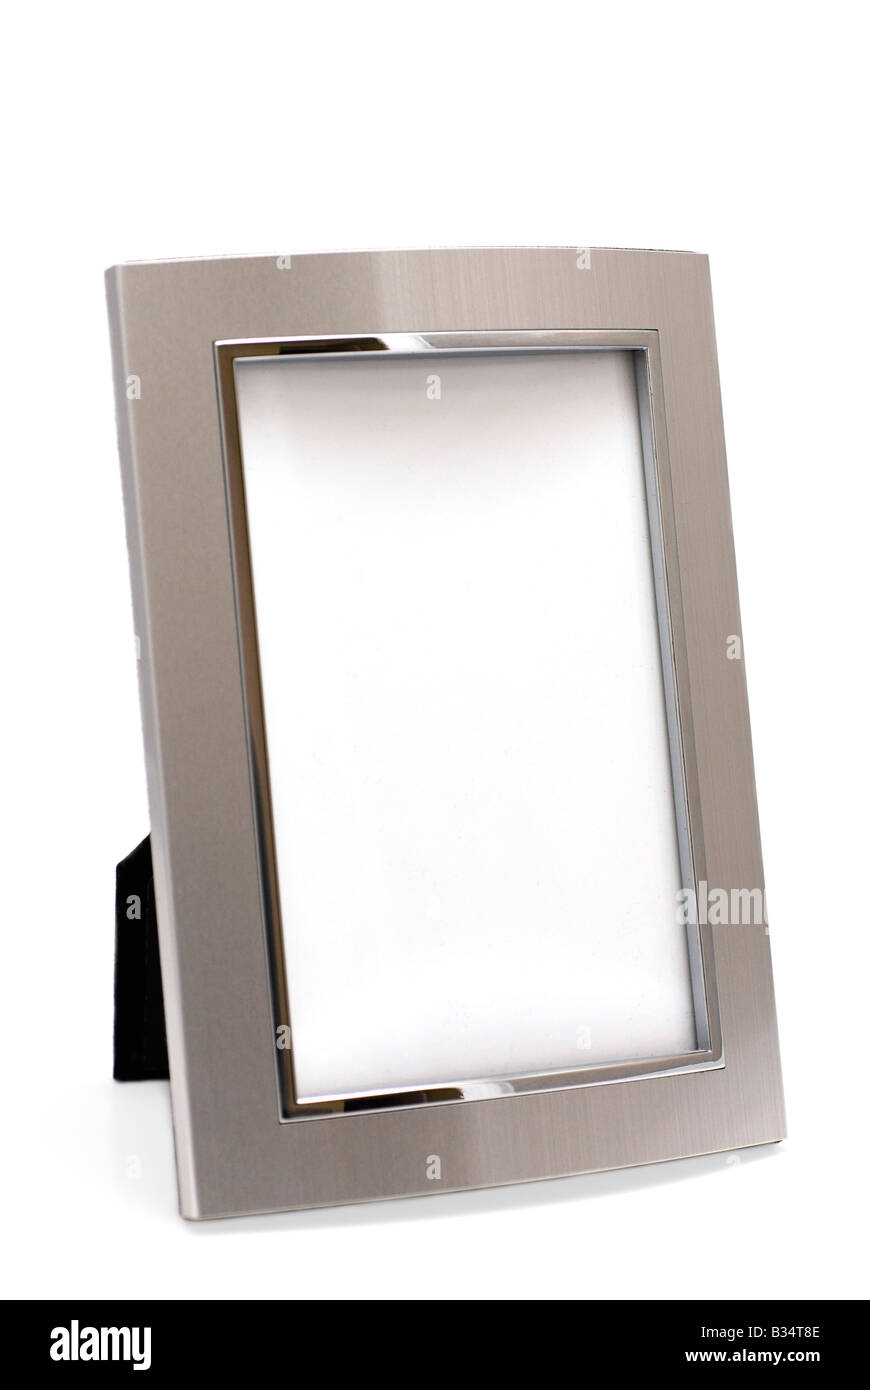 Silver Picture/Photo Frame Stock Photo